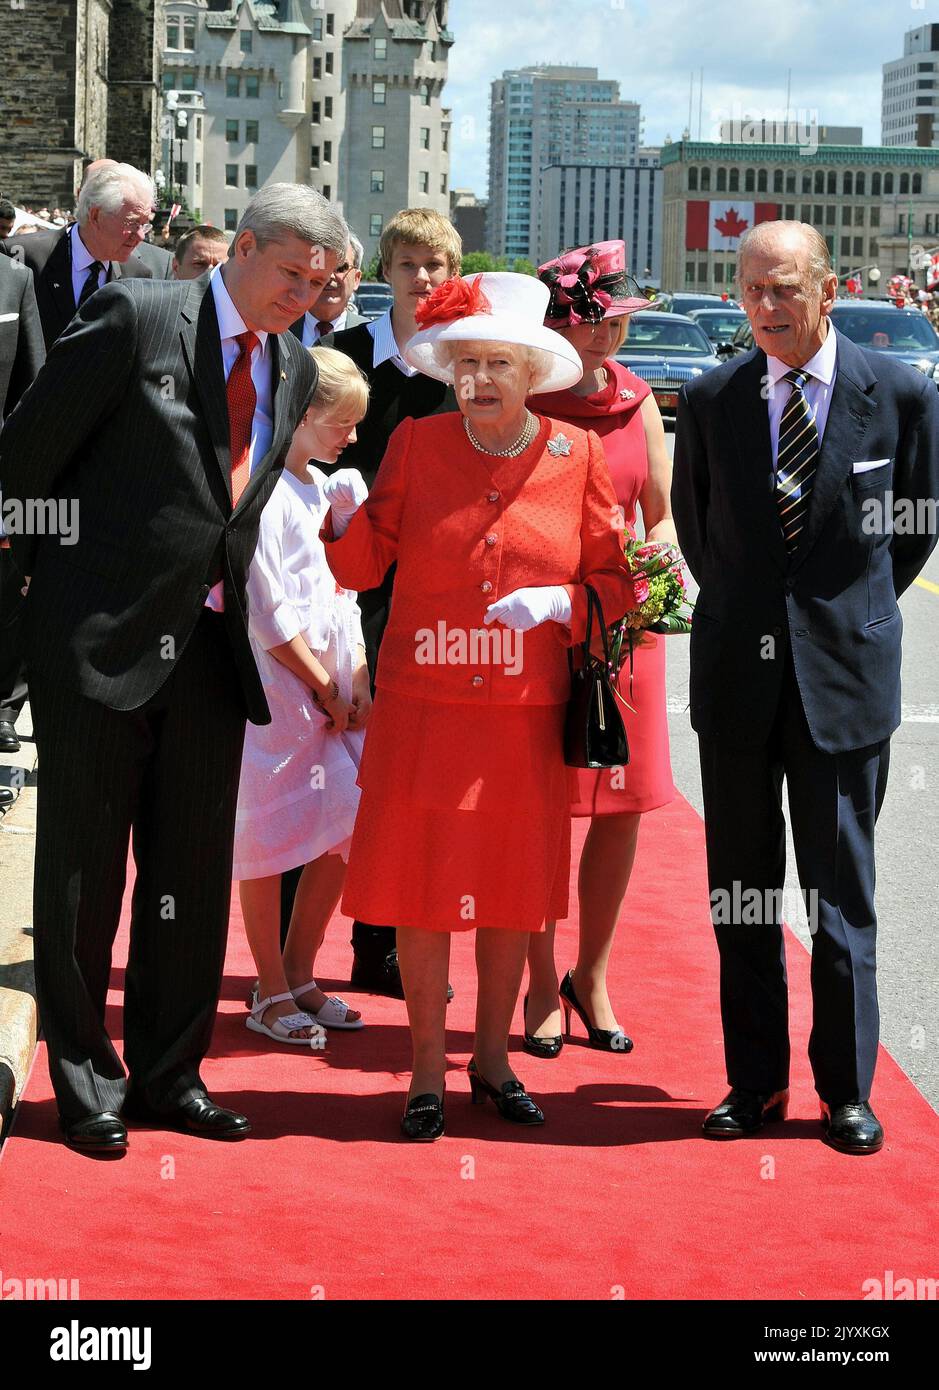 File photo dated 1/7/2010 of Queen Elizabeth II, in the red and white colours of the Canadian flag, with Stephen Harper the Prime Minister of Canada (left), and the Duke of Edinburgh, after arriving to attend the Canada Day celebrations, in Ottawa. Elizabeth II was famed for her love of block colours and matching hats and her fashion became a legendary part of her role as monarch. The Queen was once described as 'power dressing in extremis' for using vibrant shades to make herself stand out from the crowd while her hats allowed her to be easily spotted but were small enough so her face was vis Stock Photo